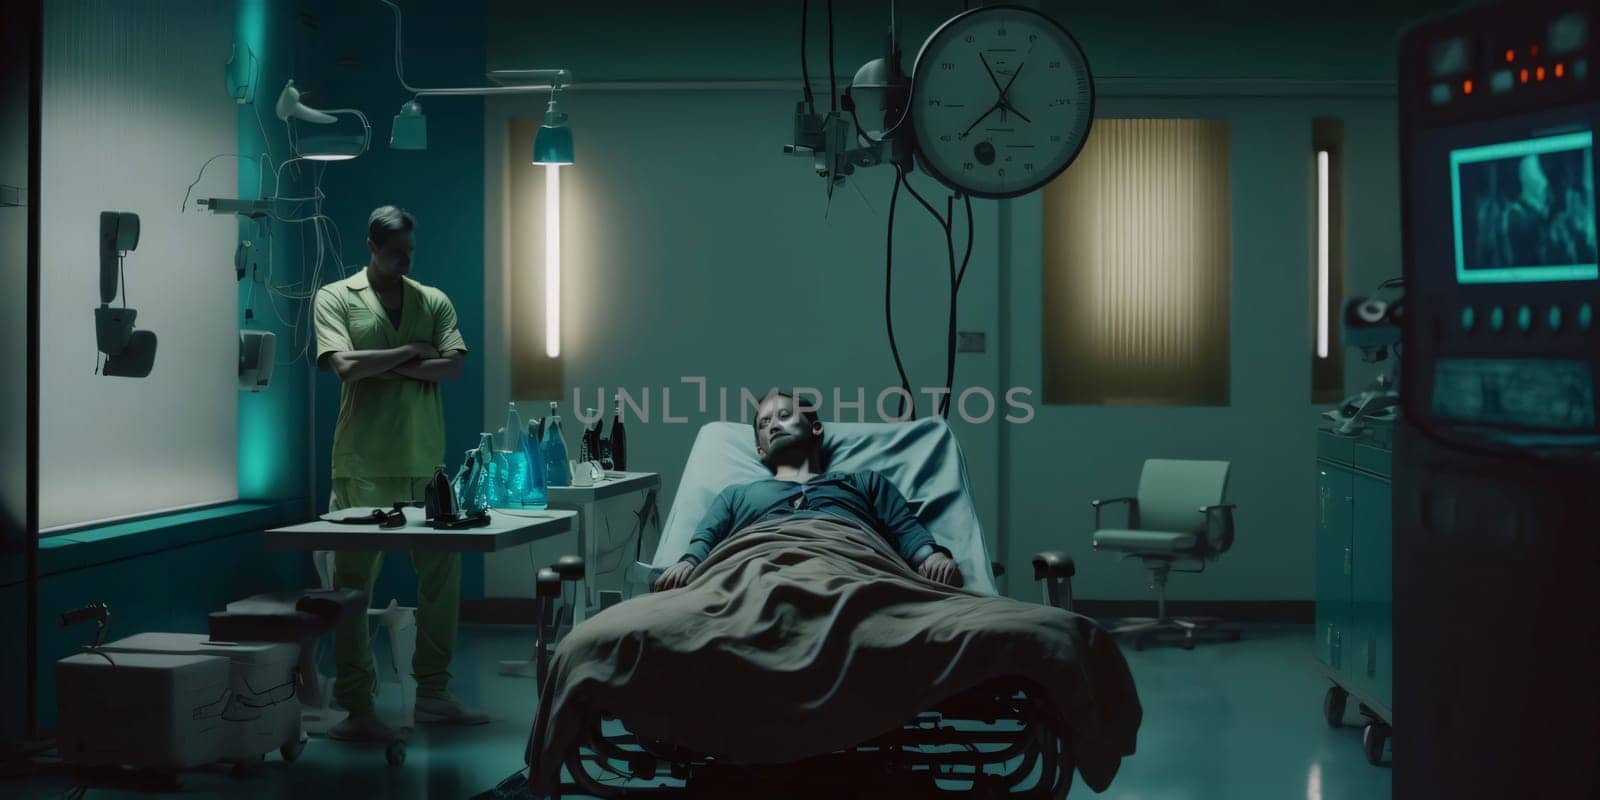 Hospital and doctors help: Man lying in hospital ward at night. Patient and doctor on background.